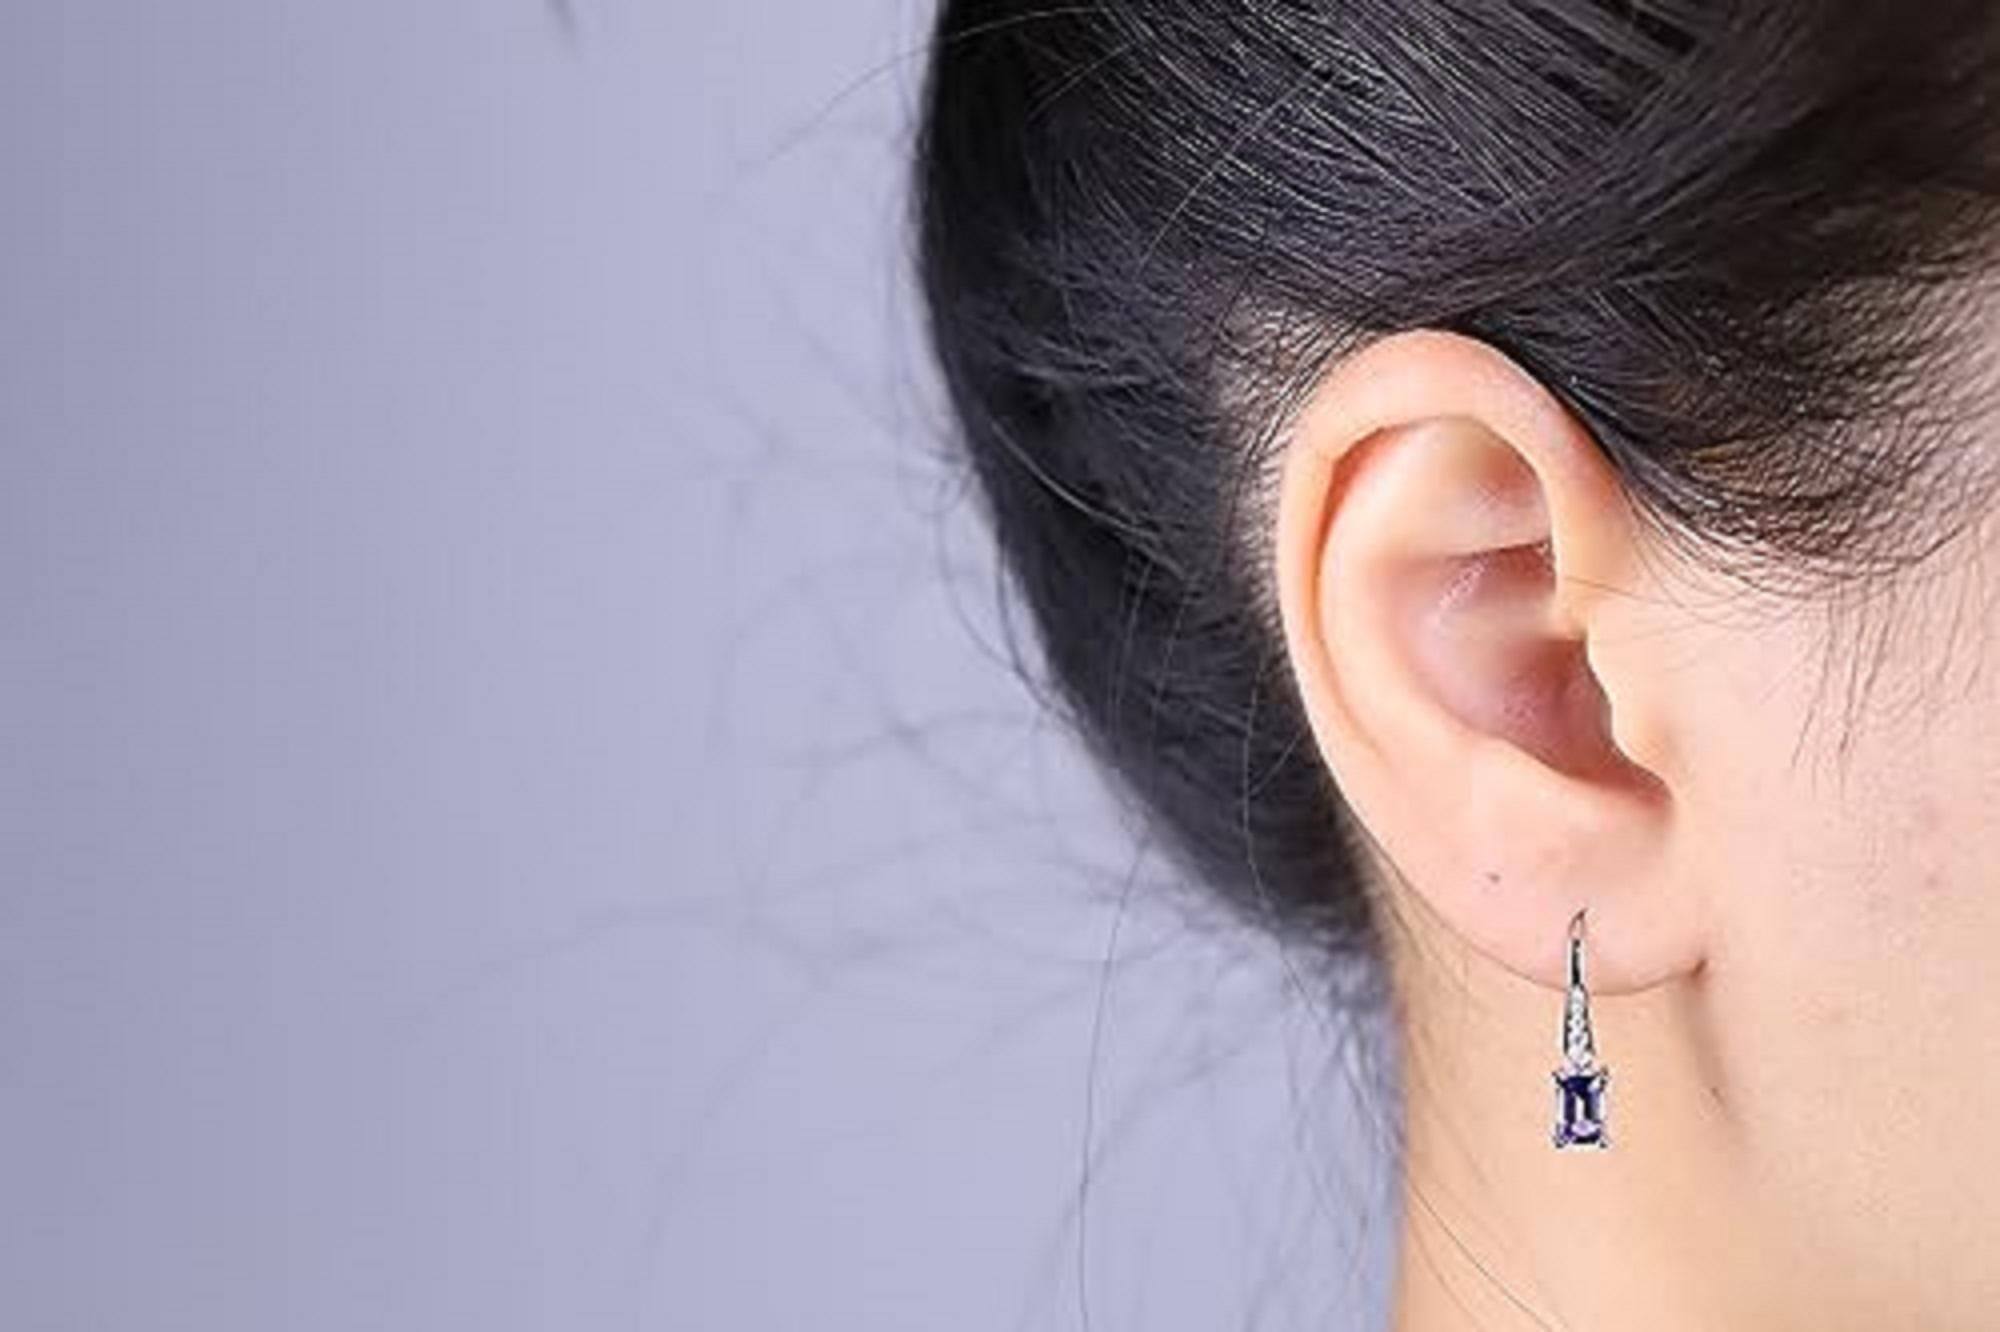 Decorate yourself in elegance with this Earring is crafted from 14-karat White Gold by Gin & Grace Earring. This Earring is made up of 4*6 Tanzanite emerald-cut (2 Pcs) 1.22 Carat Round-Cut Prong setting White Diamond (10 Pcs) 0.13 Carat. This